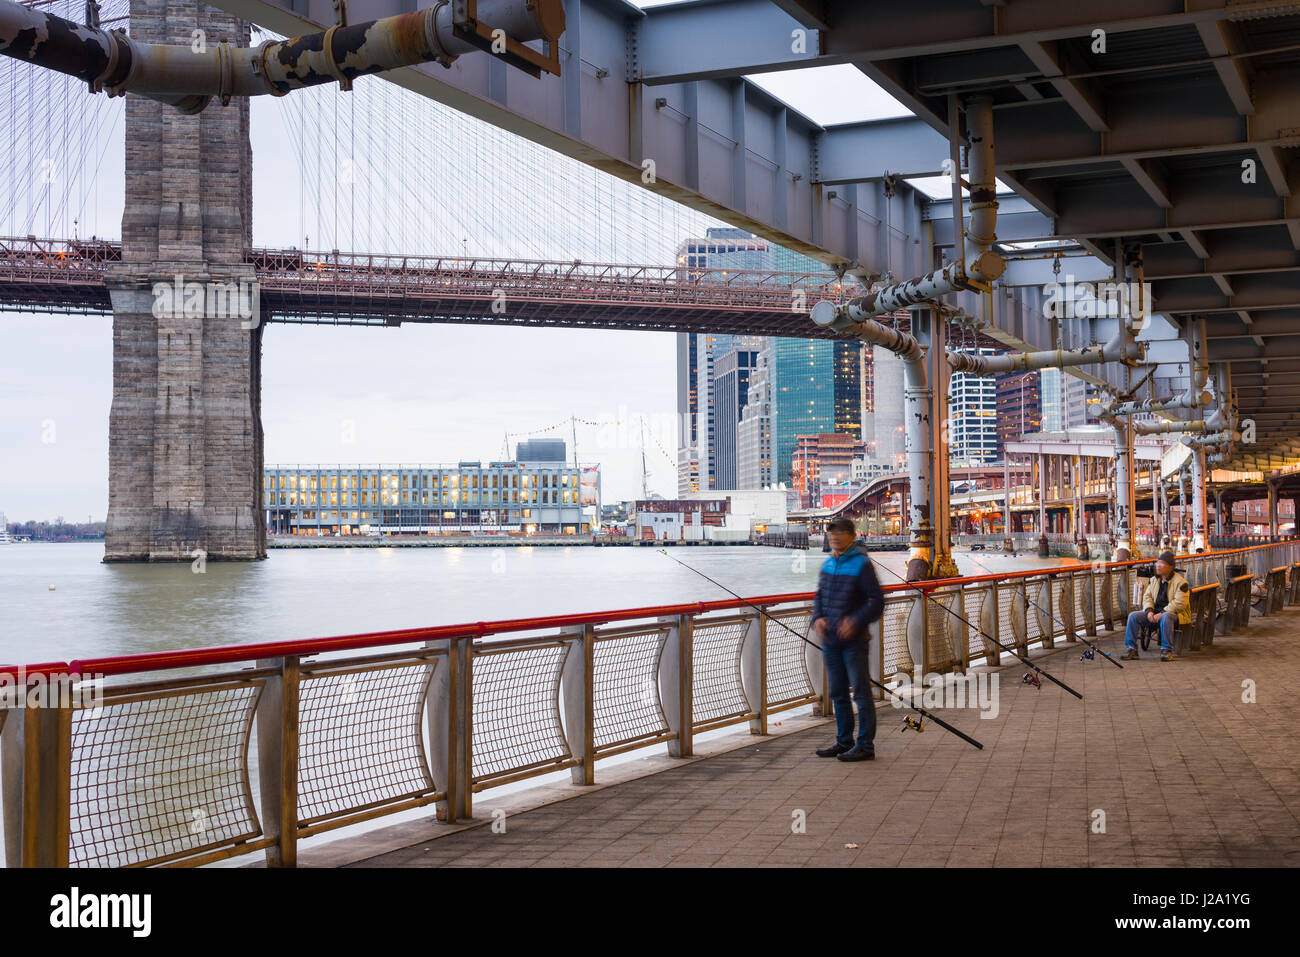 A Chinese Man Fishing In The East River Under FDR Drive And Brooklyn Bridge, New York Stock Photo